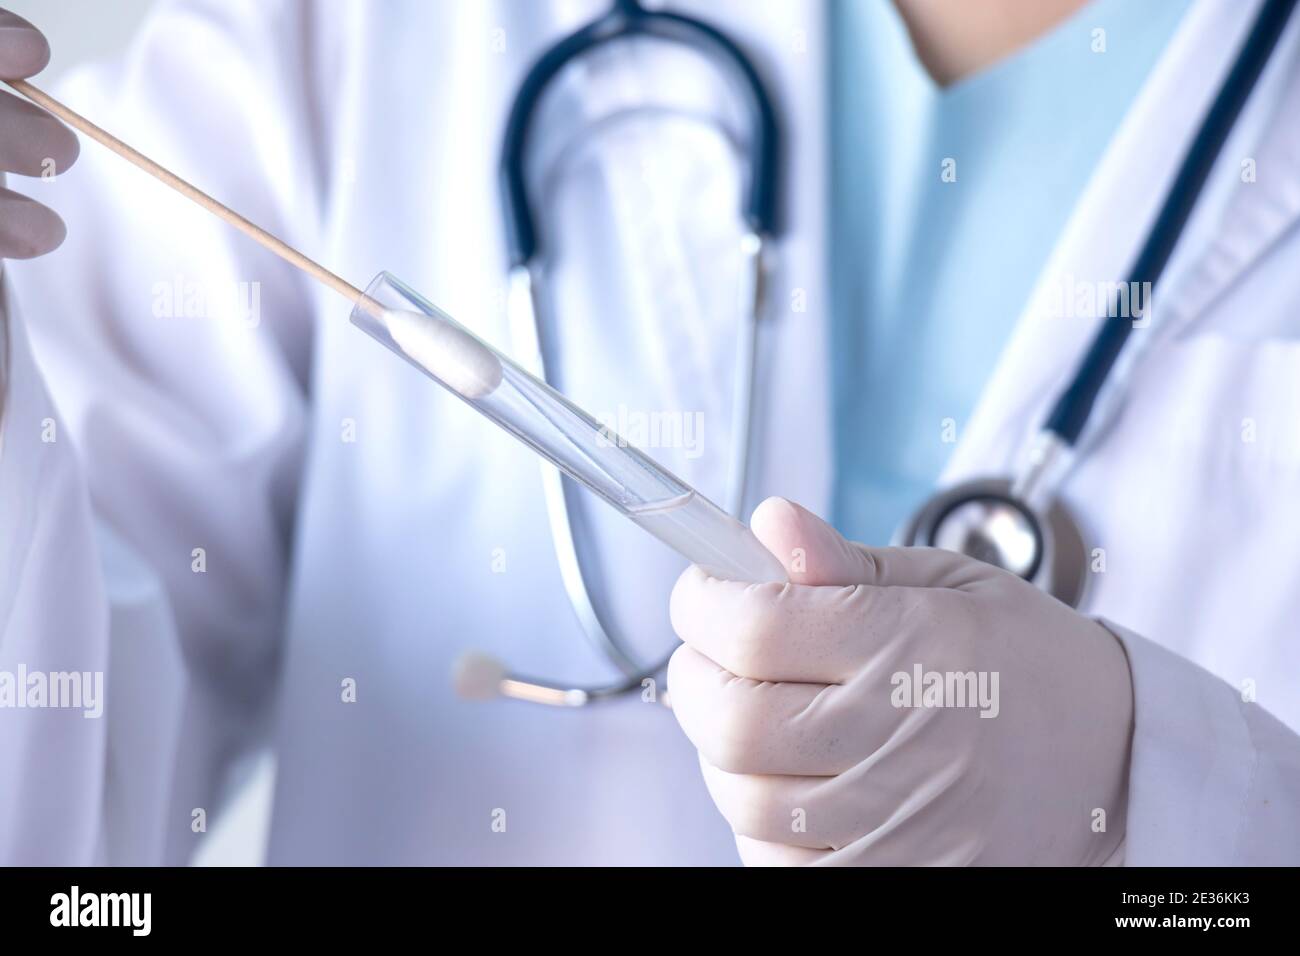 coronavirus COVID-19 test concept. doctor hand with glove holding test tube with patient nasal secretion cotton swab sample for corona virus infection Stock Photo